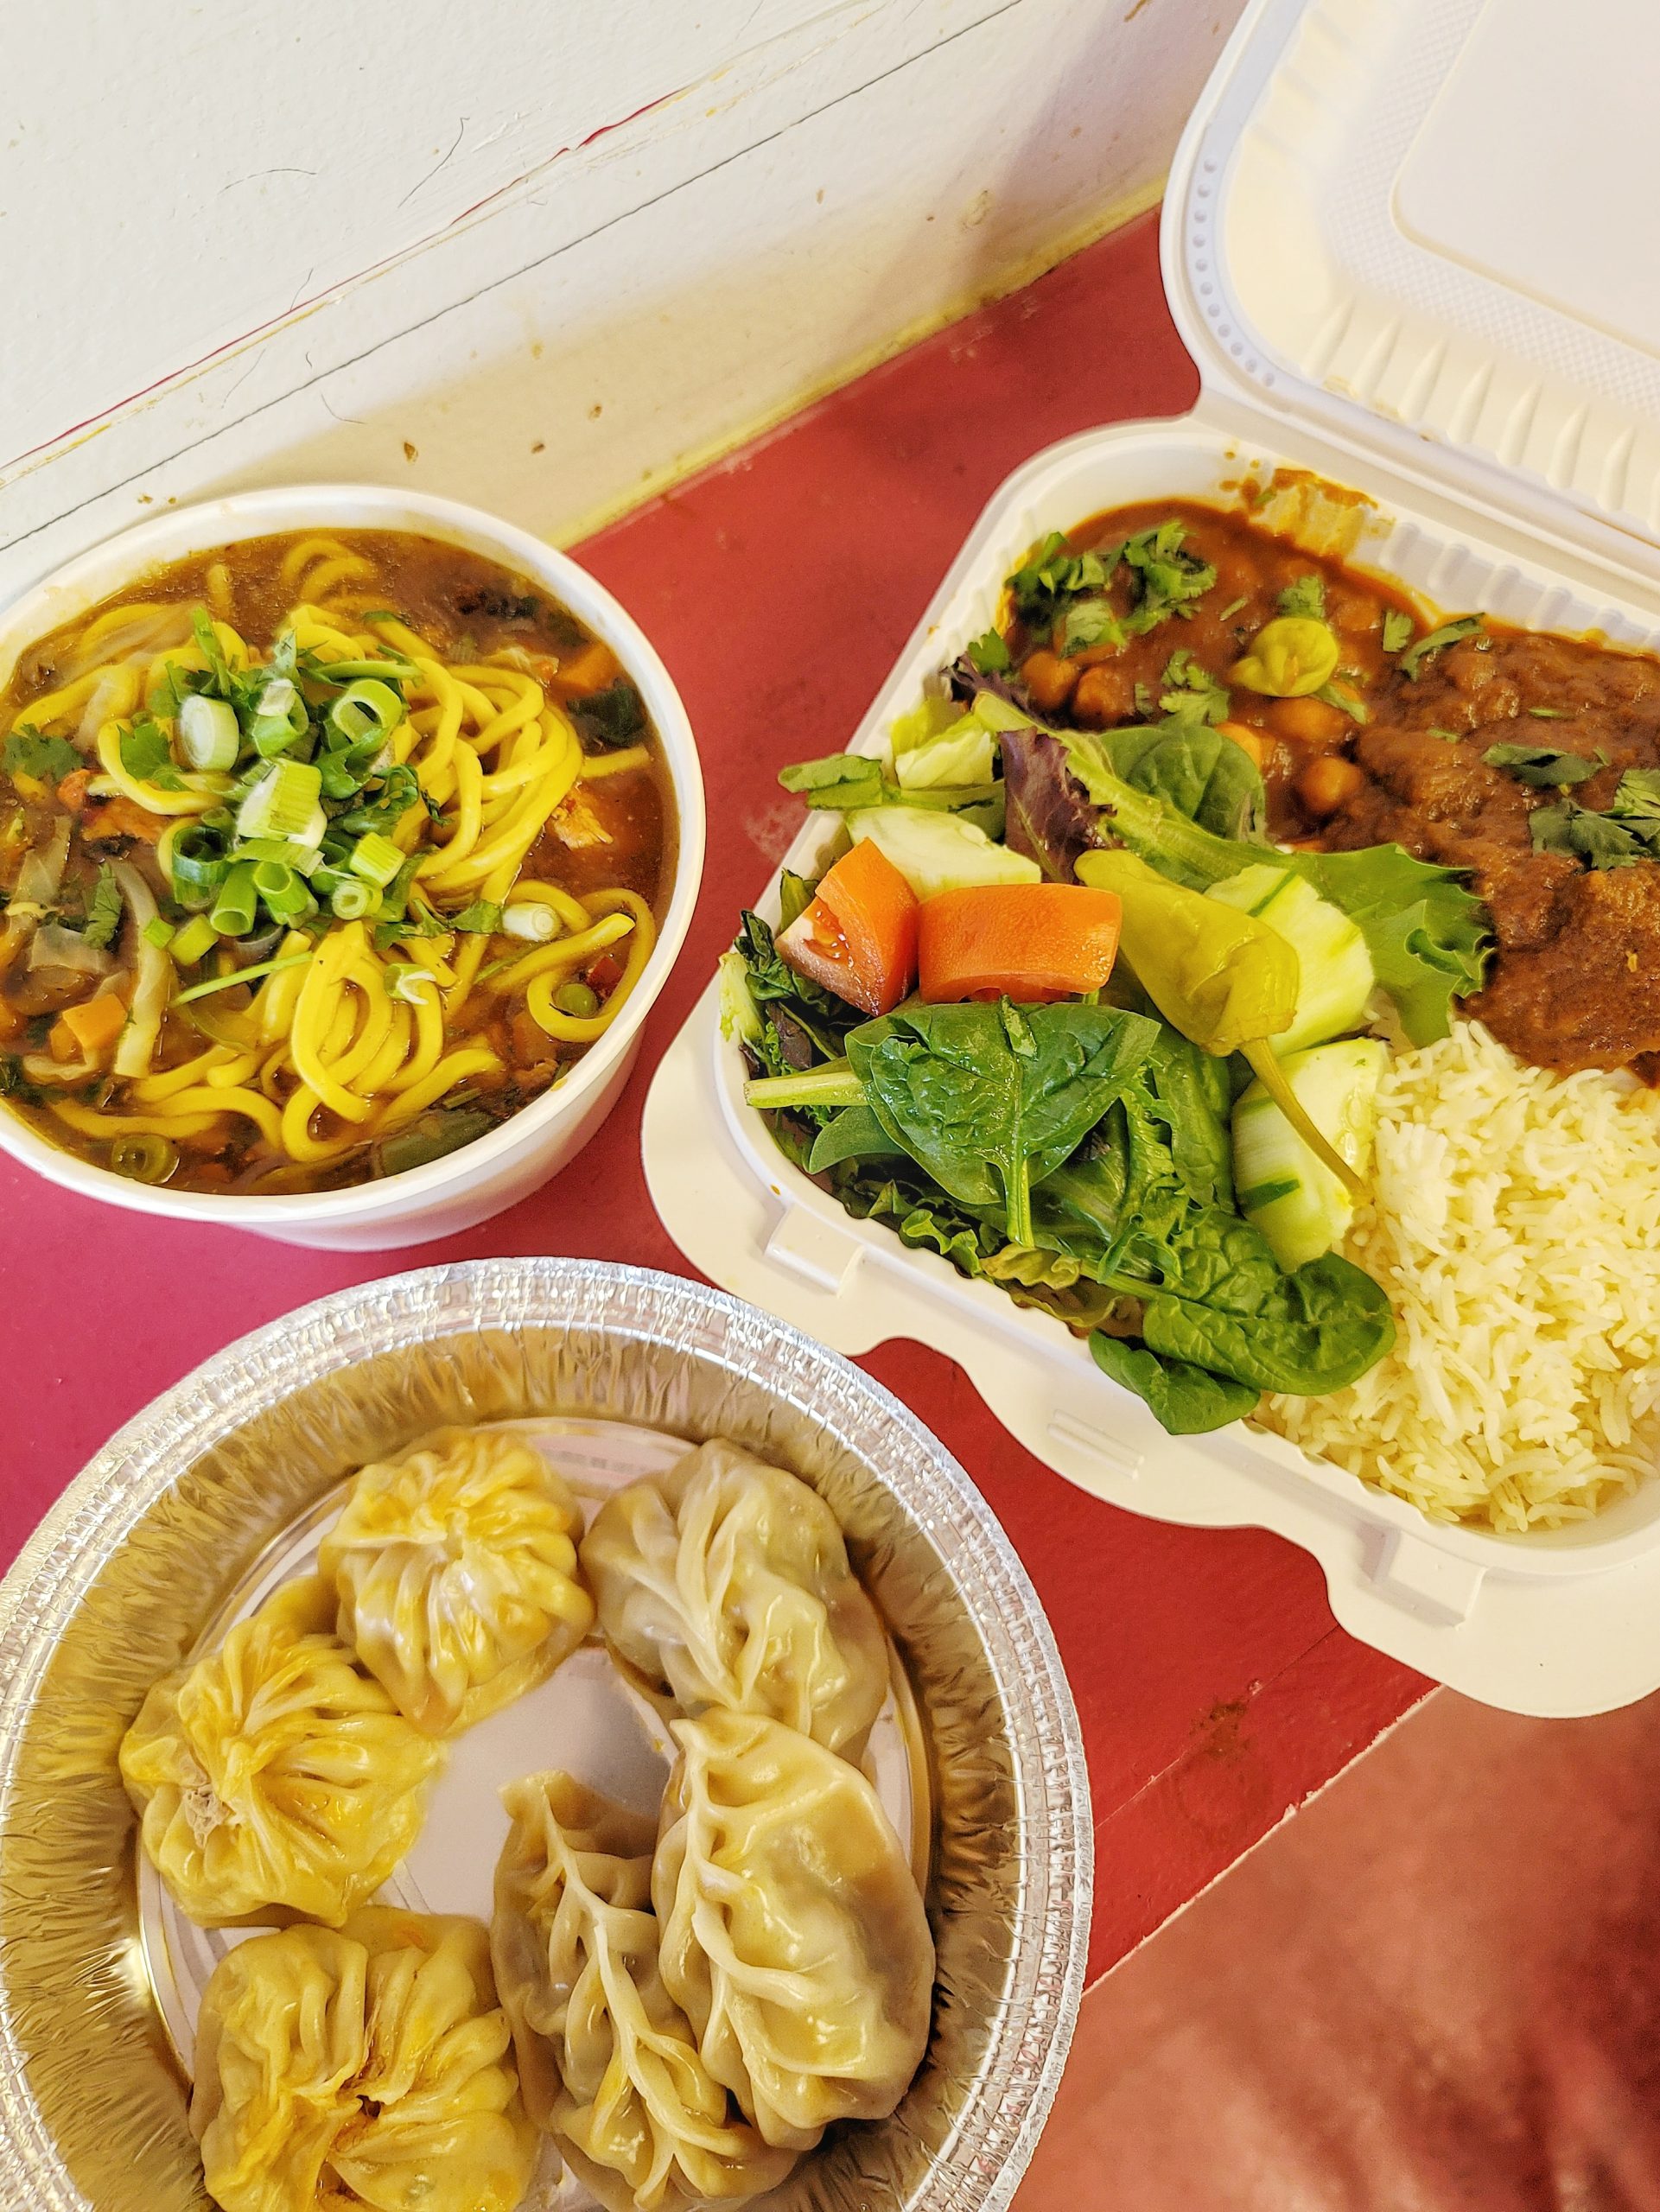 Momos, curry, and soup from Moh Moh Licious in Shepherd Park